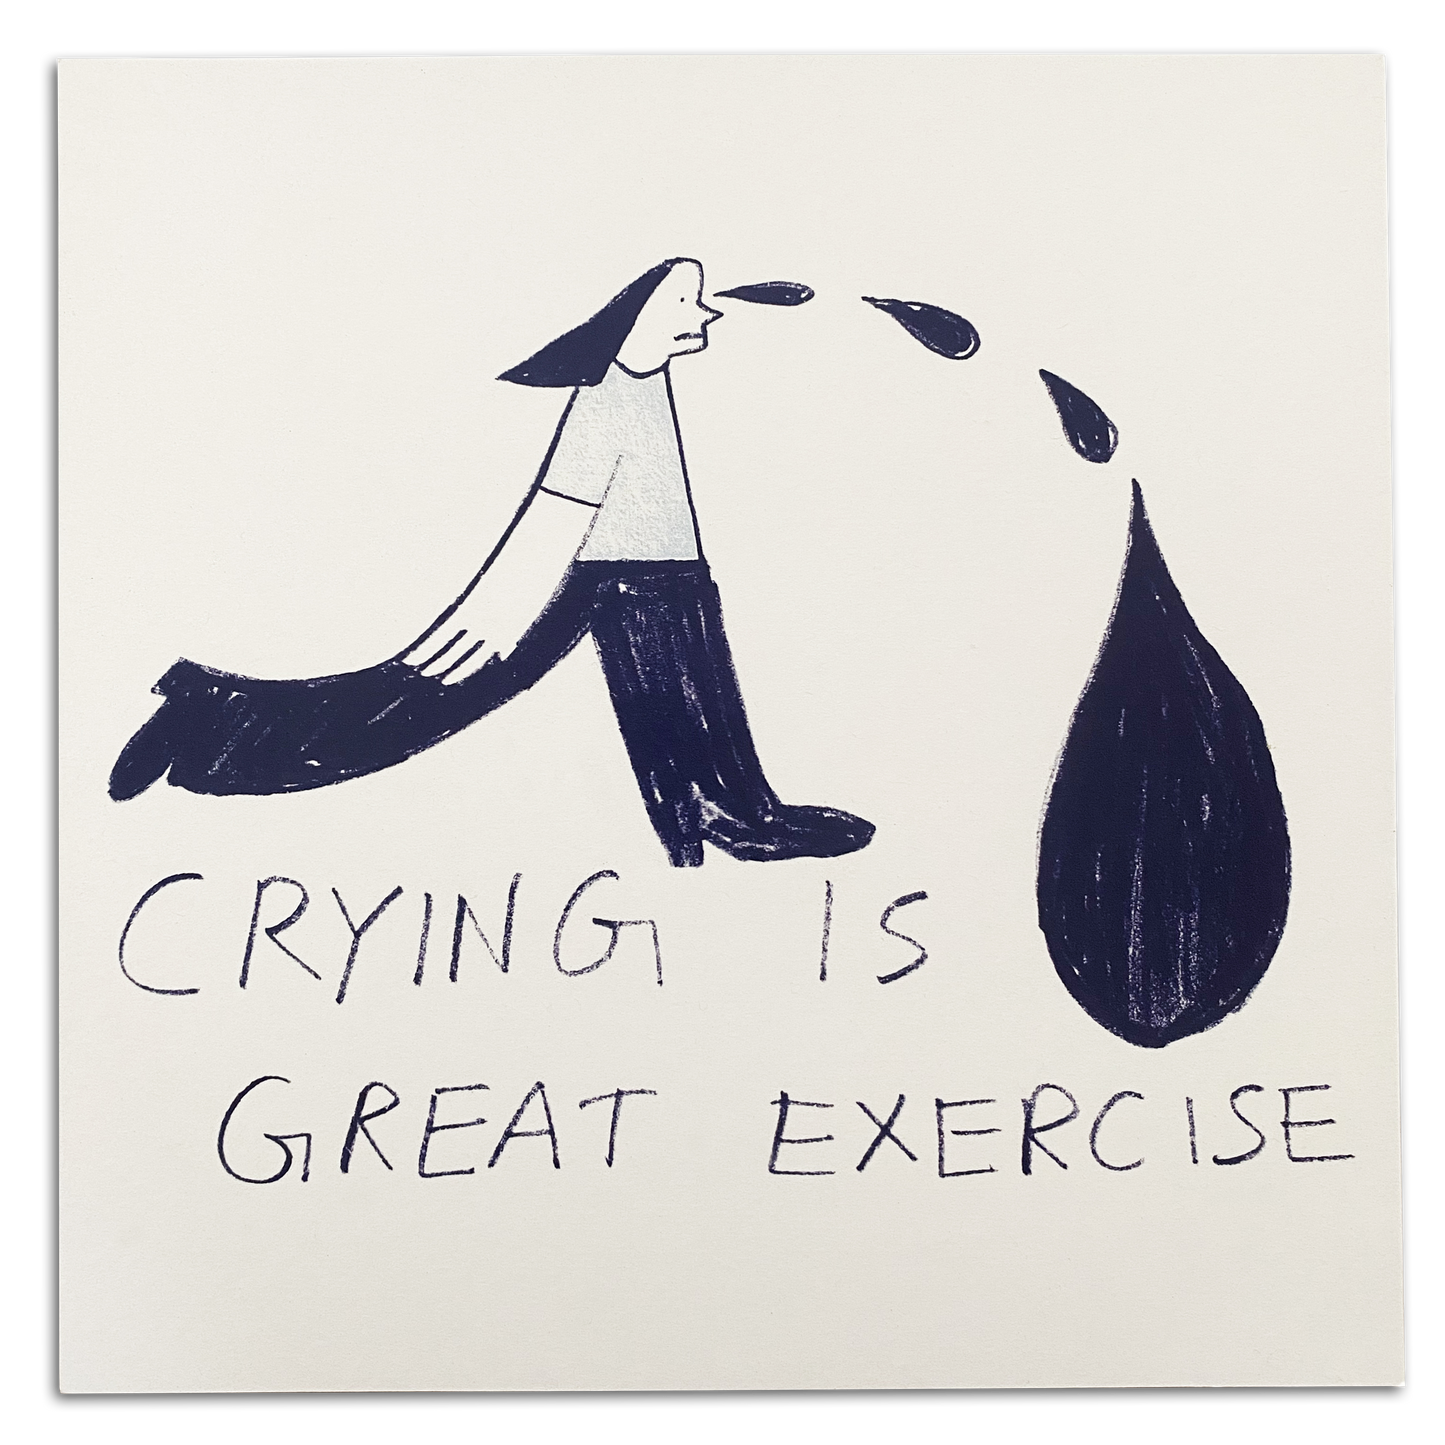 Crying is Great Exercise